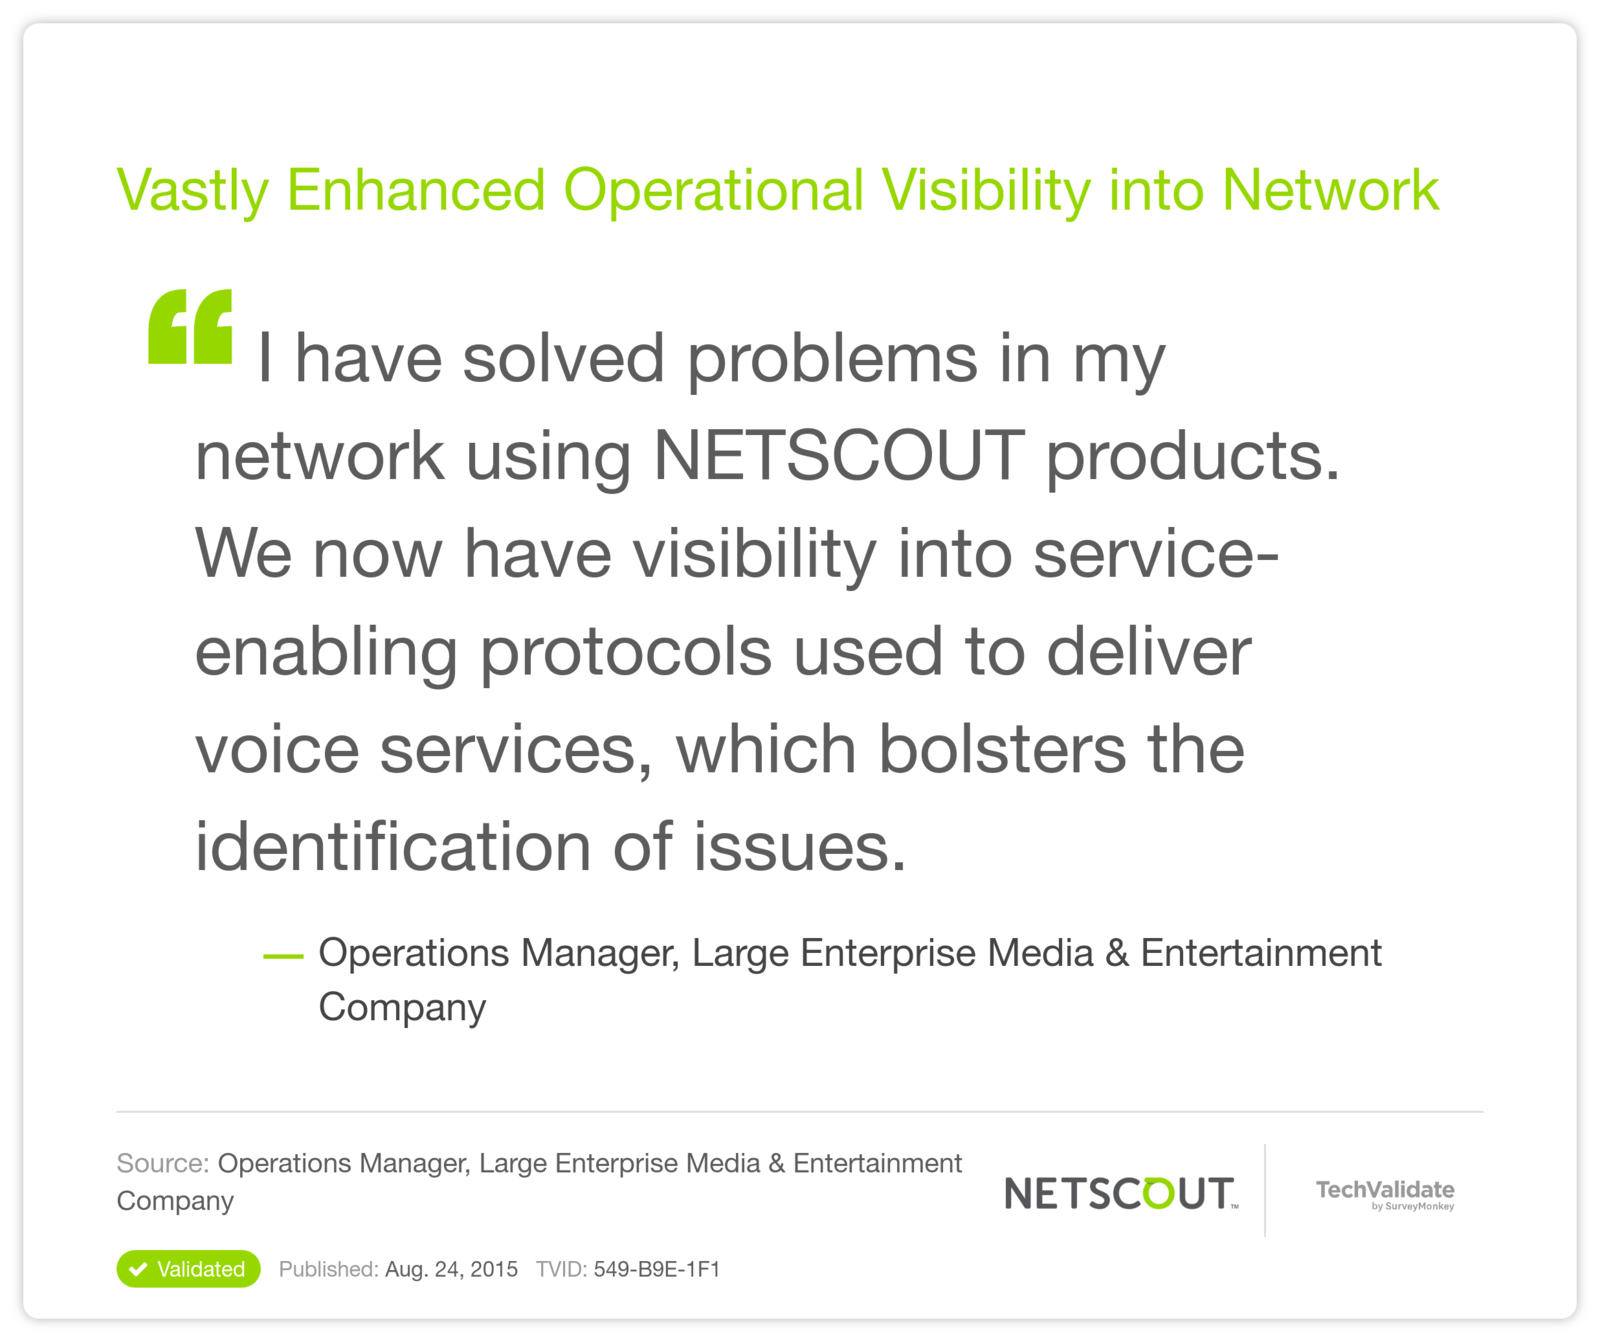 Vastly Enhanced Operational Visibility into Network